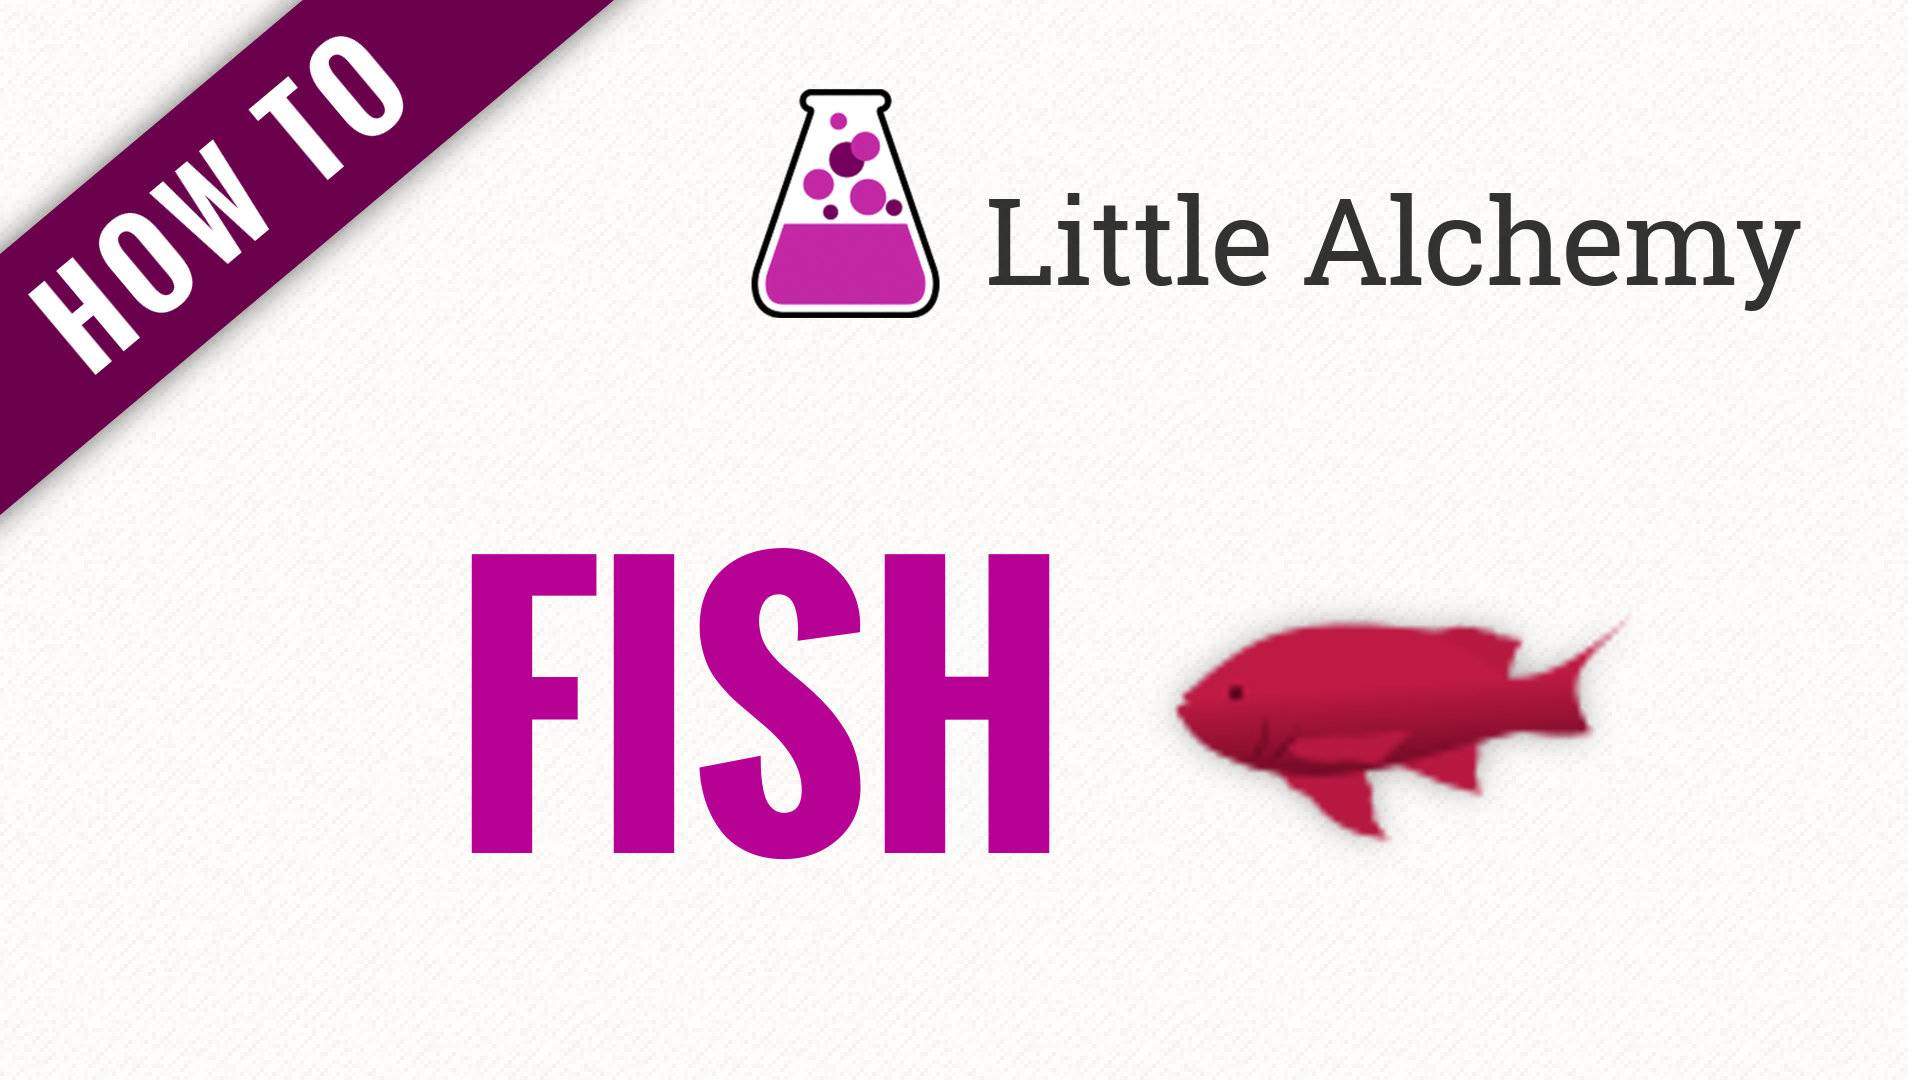 How to Make Fish in Little Alchemy? | 17 Simple Steps - HHOWTO